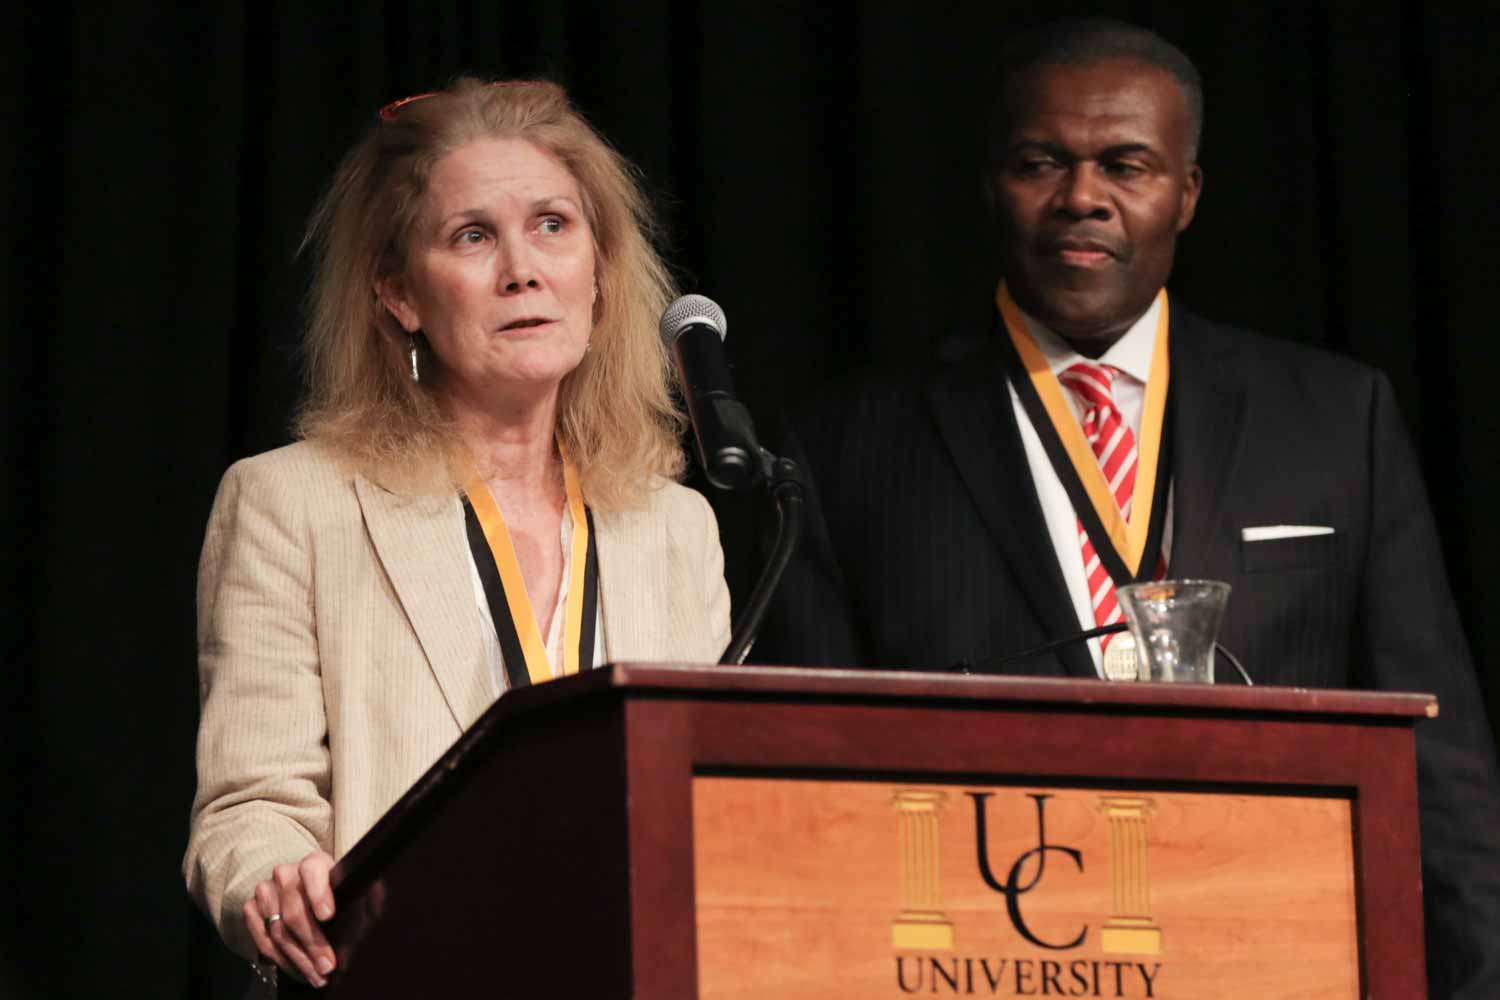 Sandy Rosenbush, an ESPN event news editor, accepts an honor medal on behalf of the Sports Journalism Institute, along with Leon Carter. The two are co-directors of the Institute, a nine-week training and internship program for college students interested in sports journalism careers. The Institute is designed to attract talented minorities and women to journalism through opportunities in sports reporting and editing as well as enhance racial and gender diversity in sports departments nationwide.